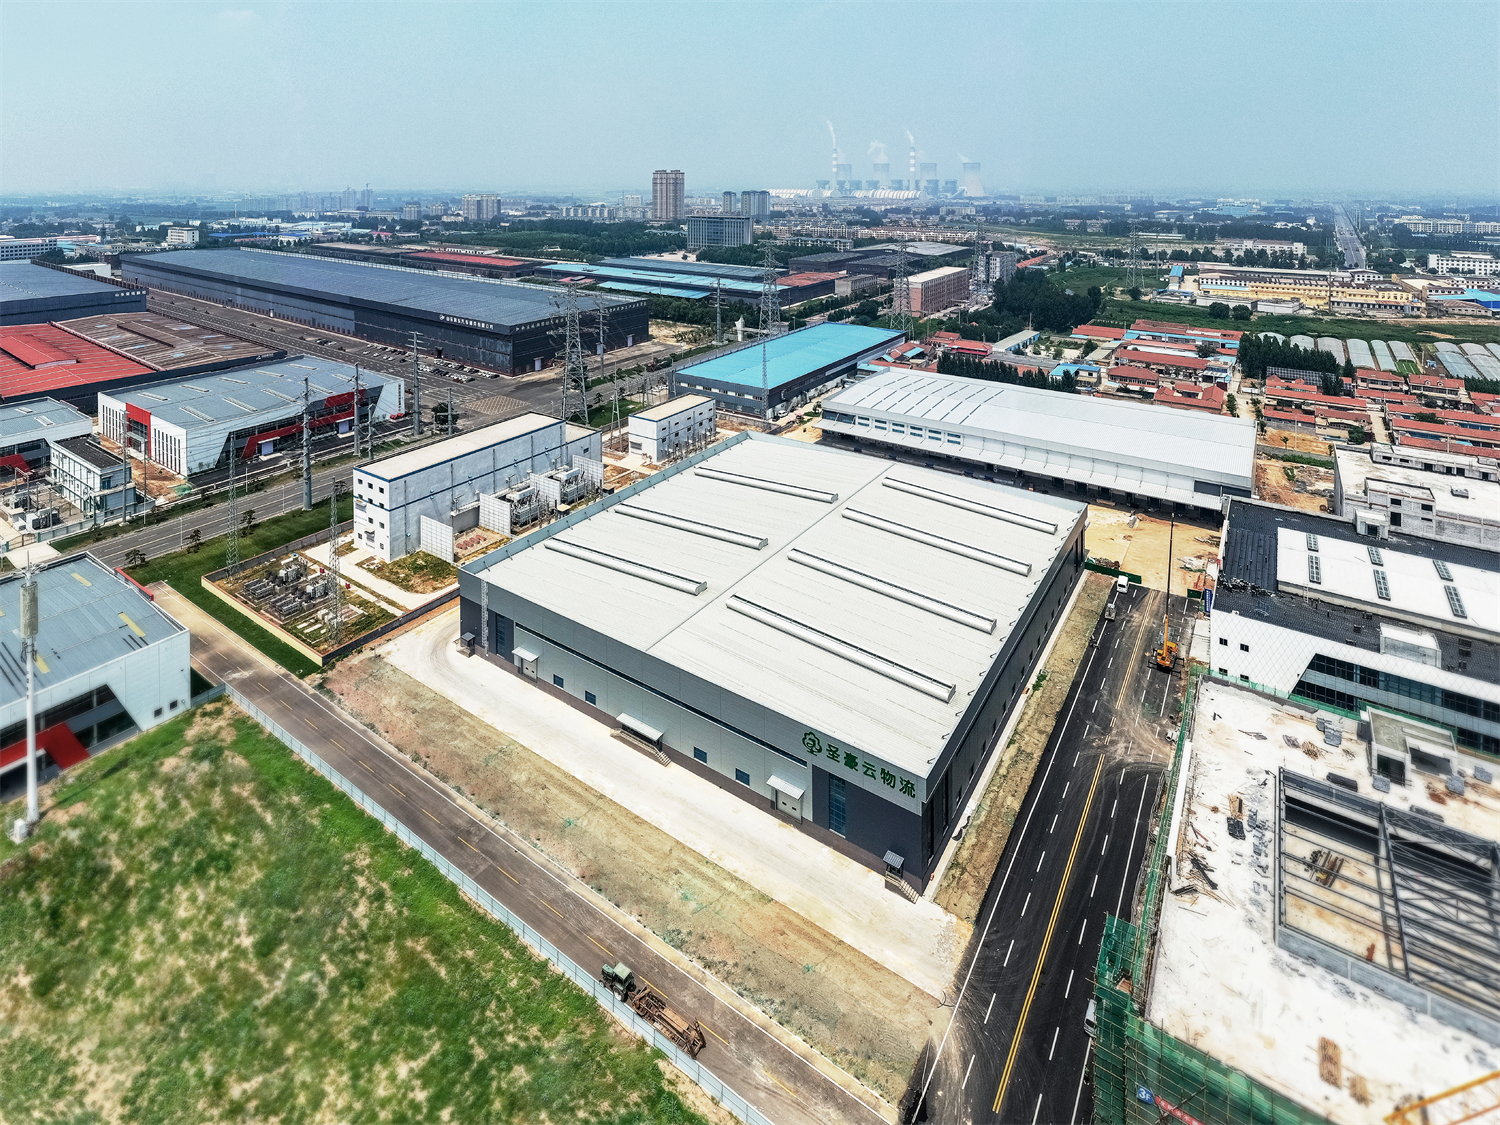 With equal emphasis on function and beauty, green building materials help the construction of logistics center(图1)